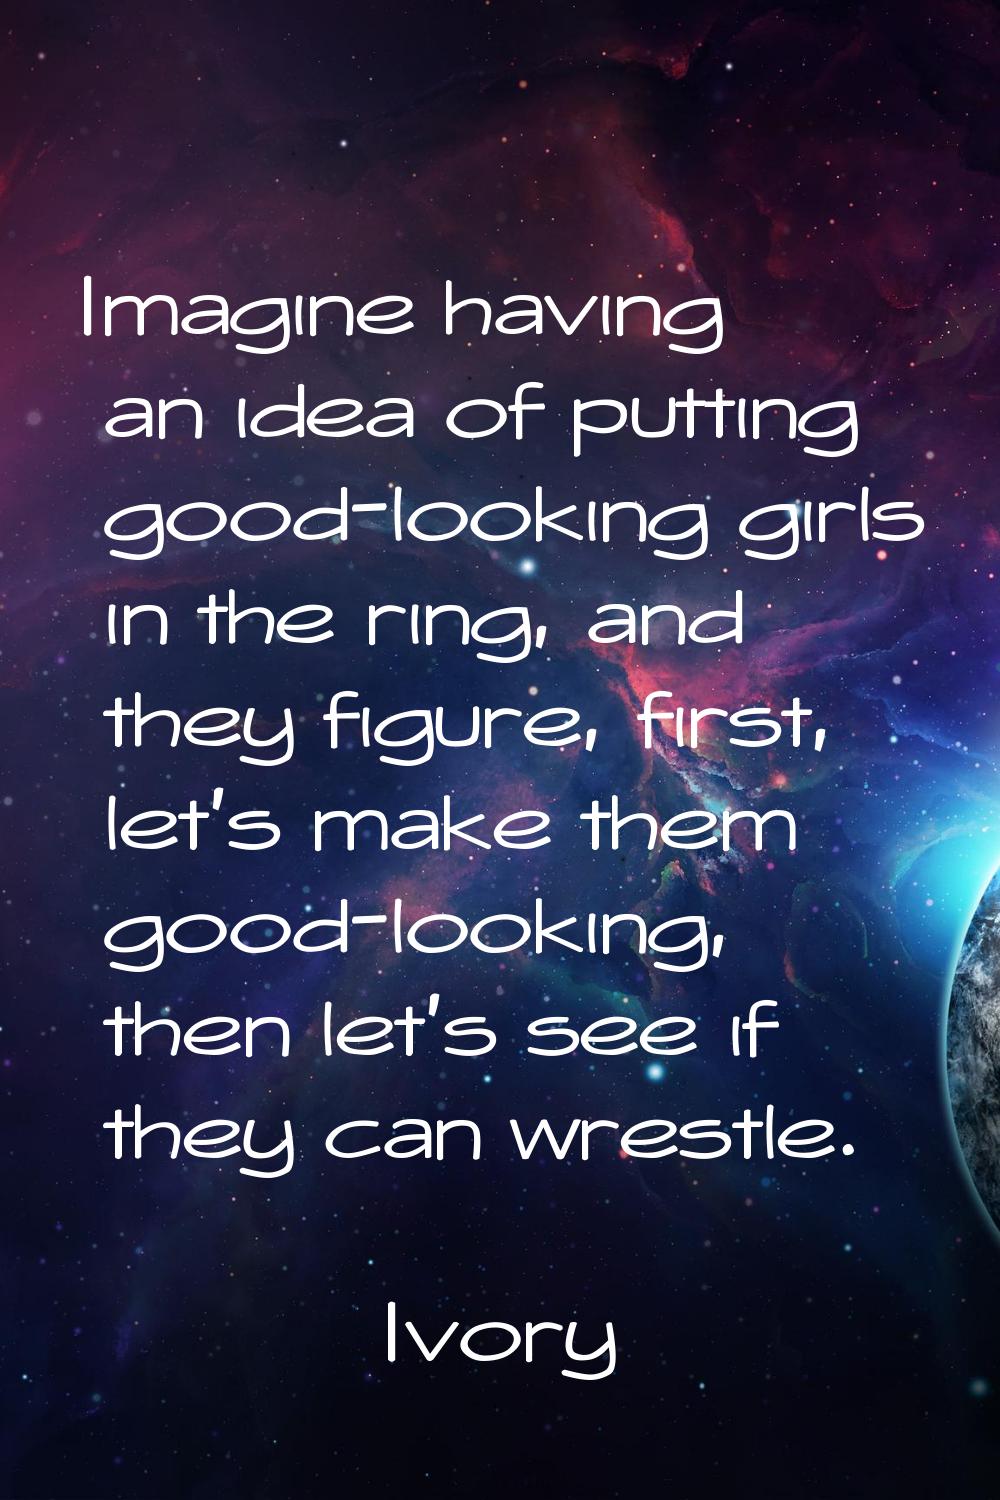 Imagine having an idea of putting good-looking girls in the ring, and they figure, first, let's mak